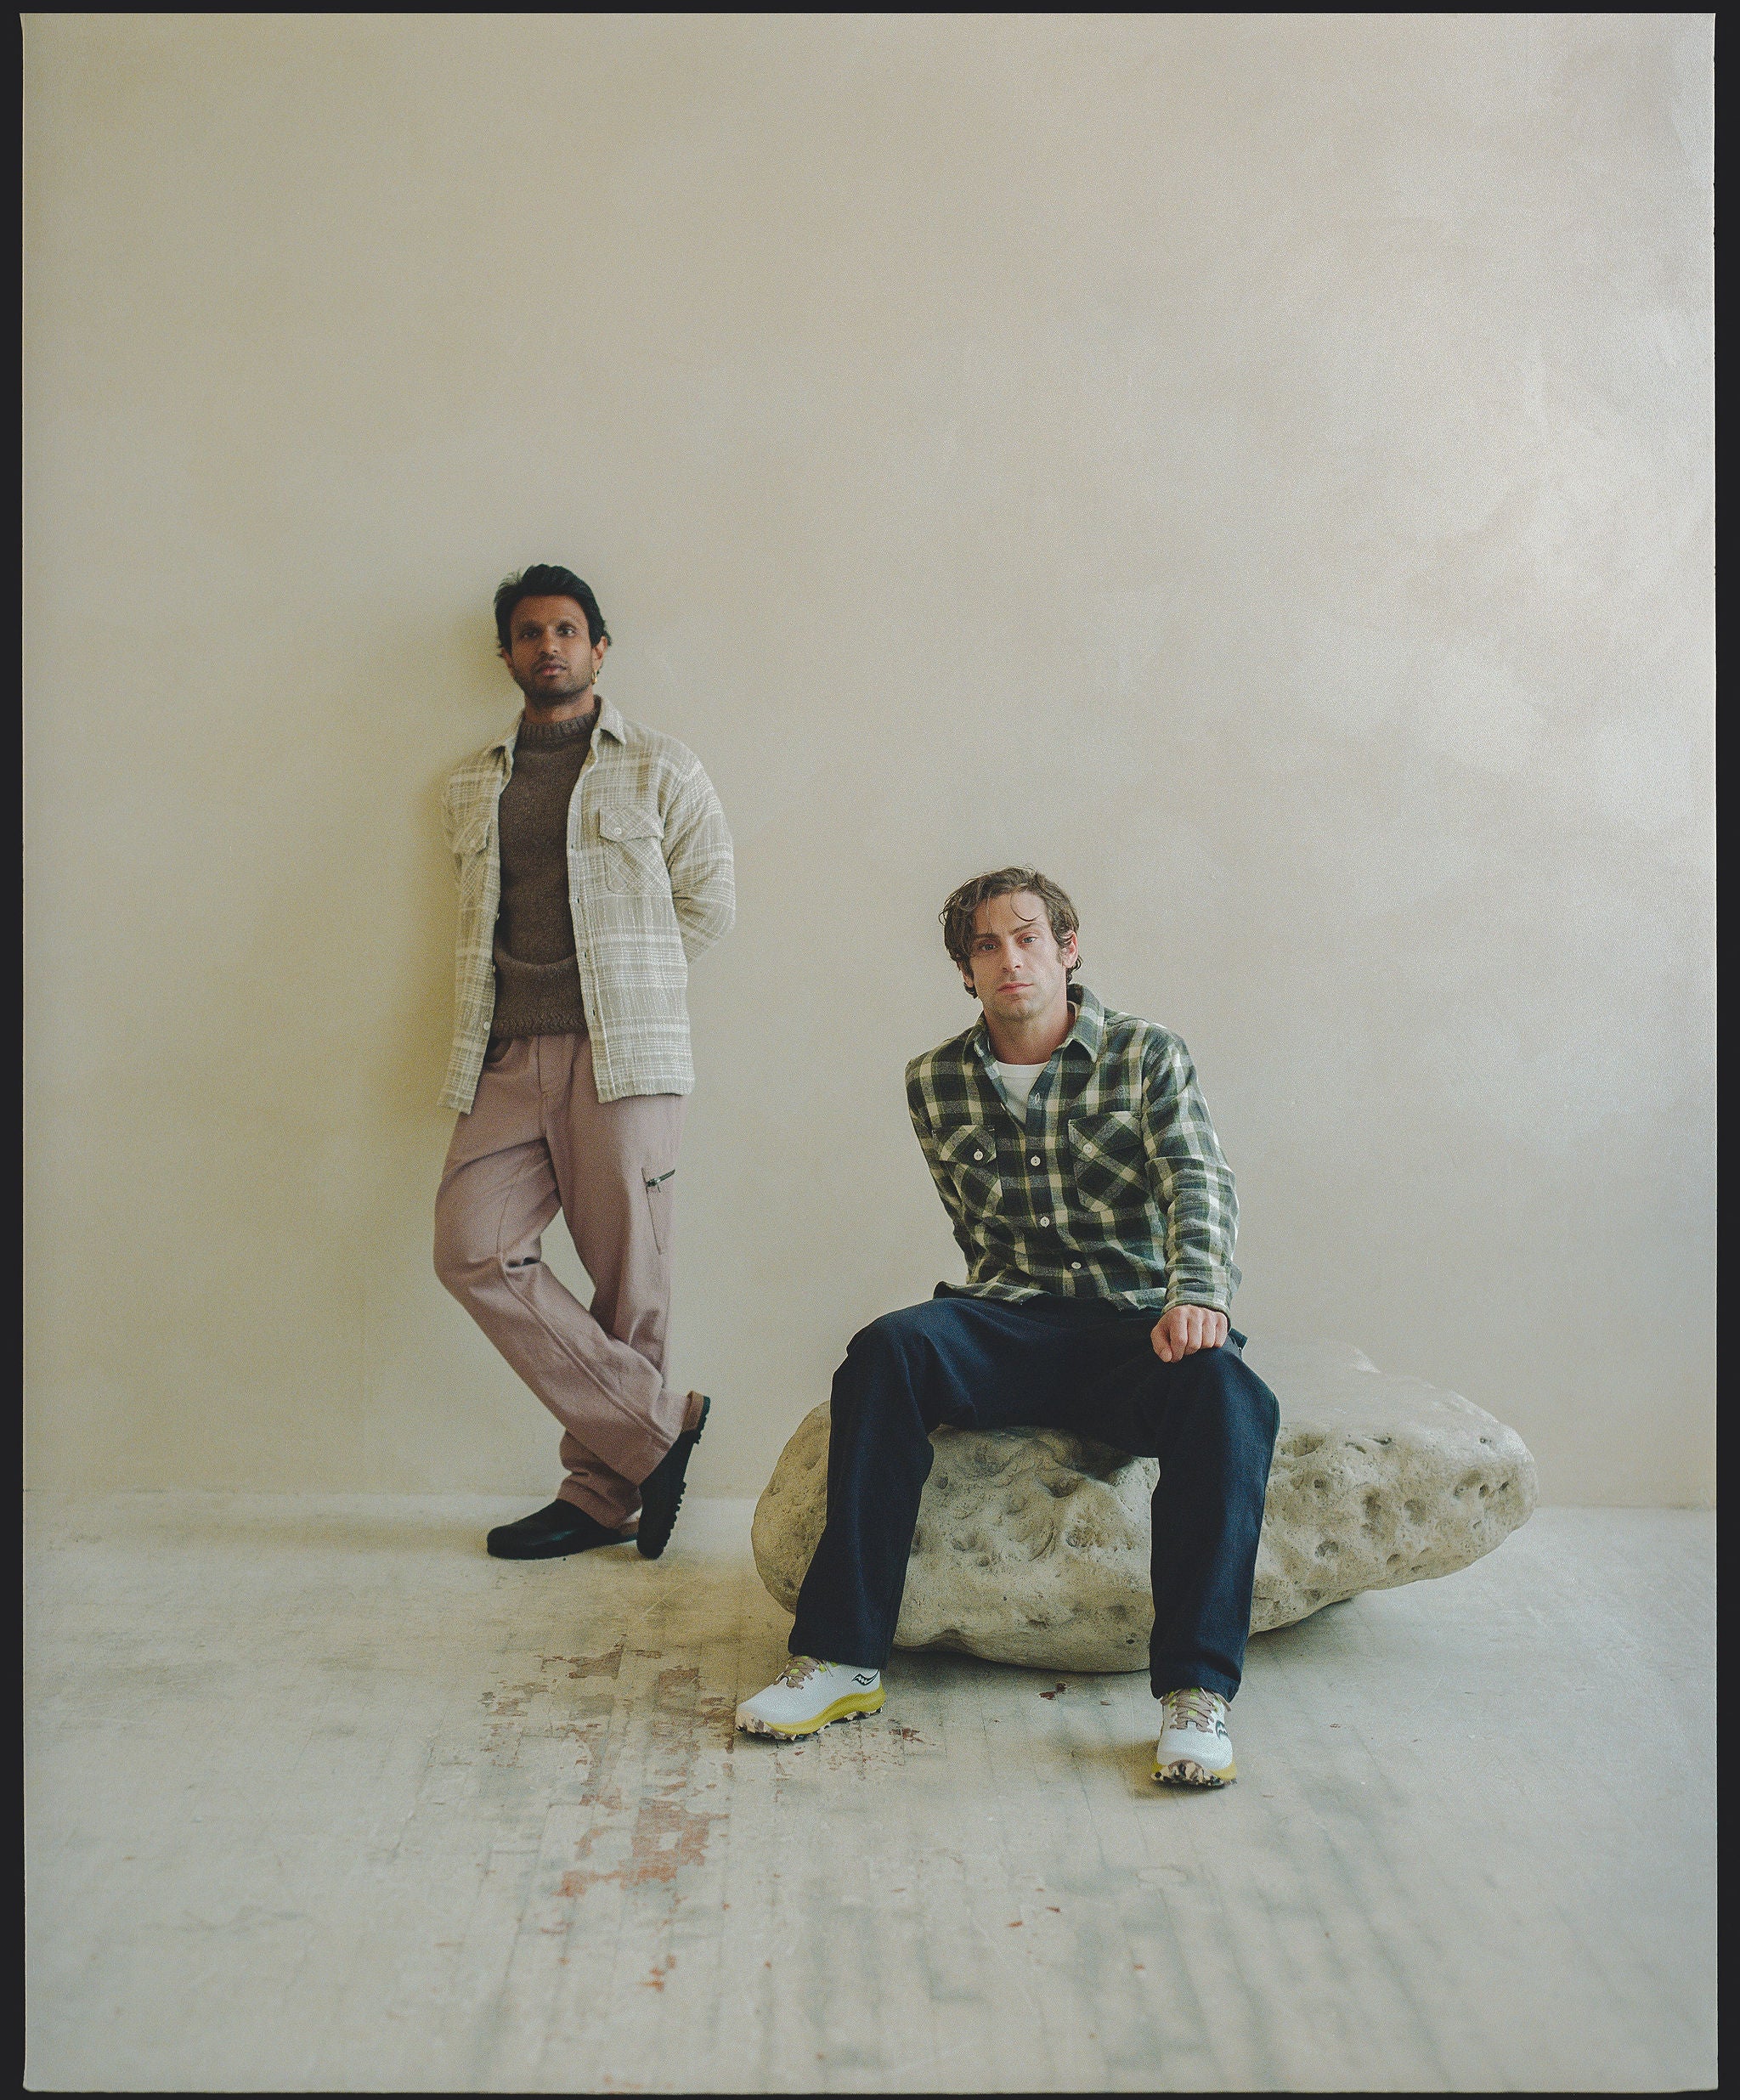 A duo of men in flannel shirts and roomy pants in a neutral colored room.